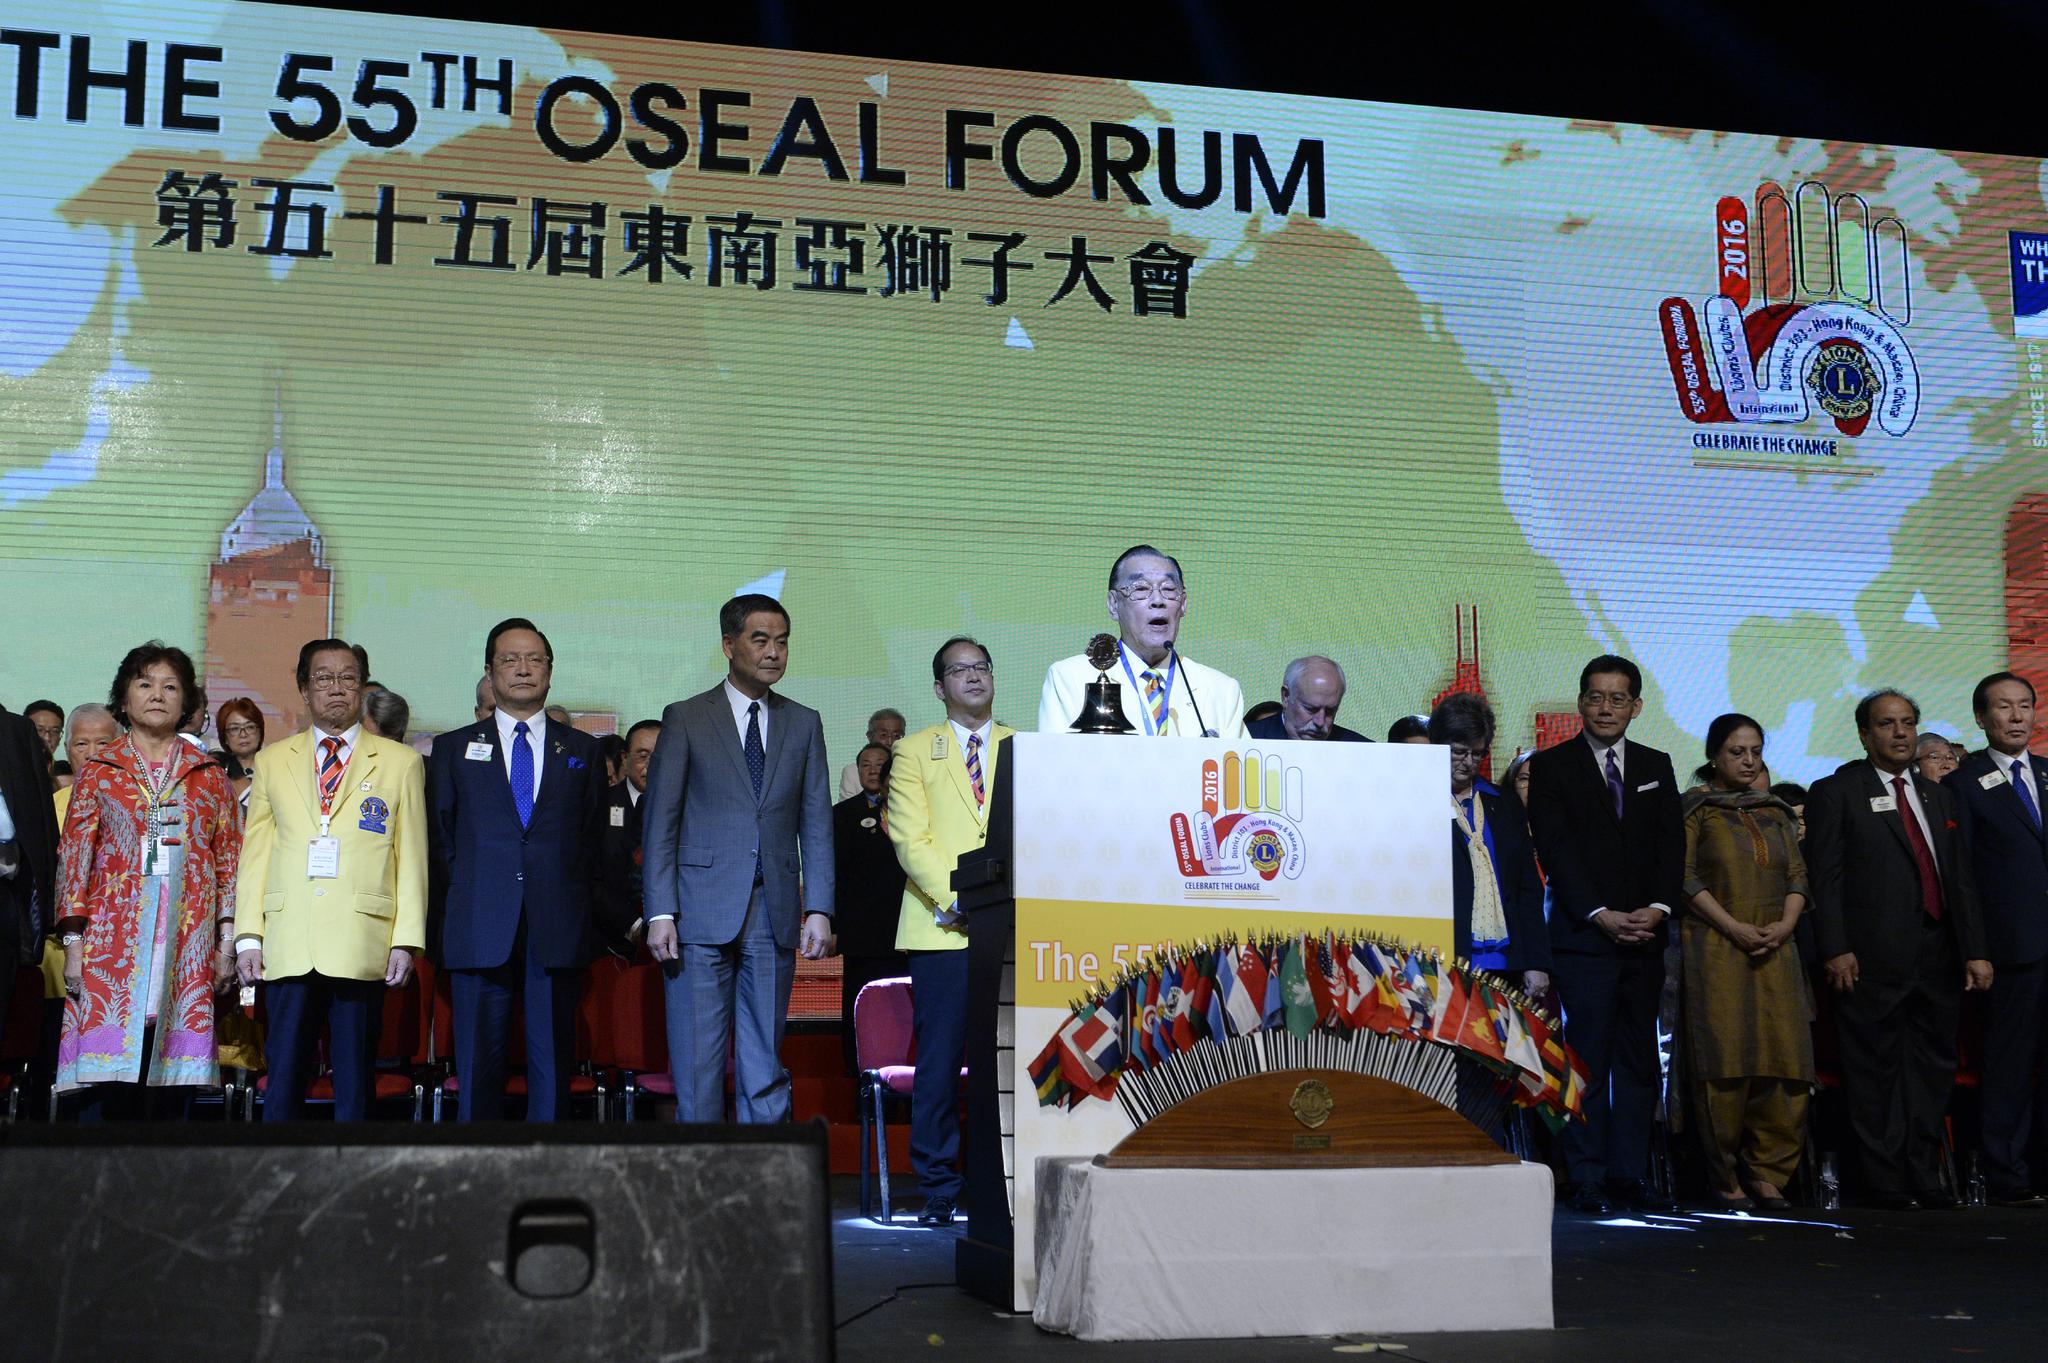 OSEAL Forum and debut Cosmoprof Asia event